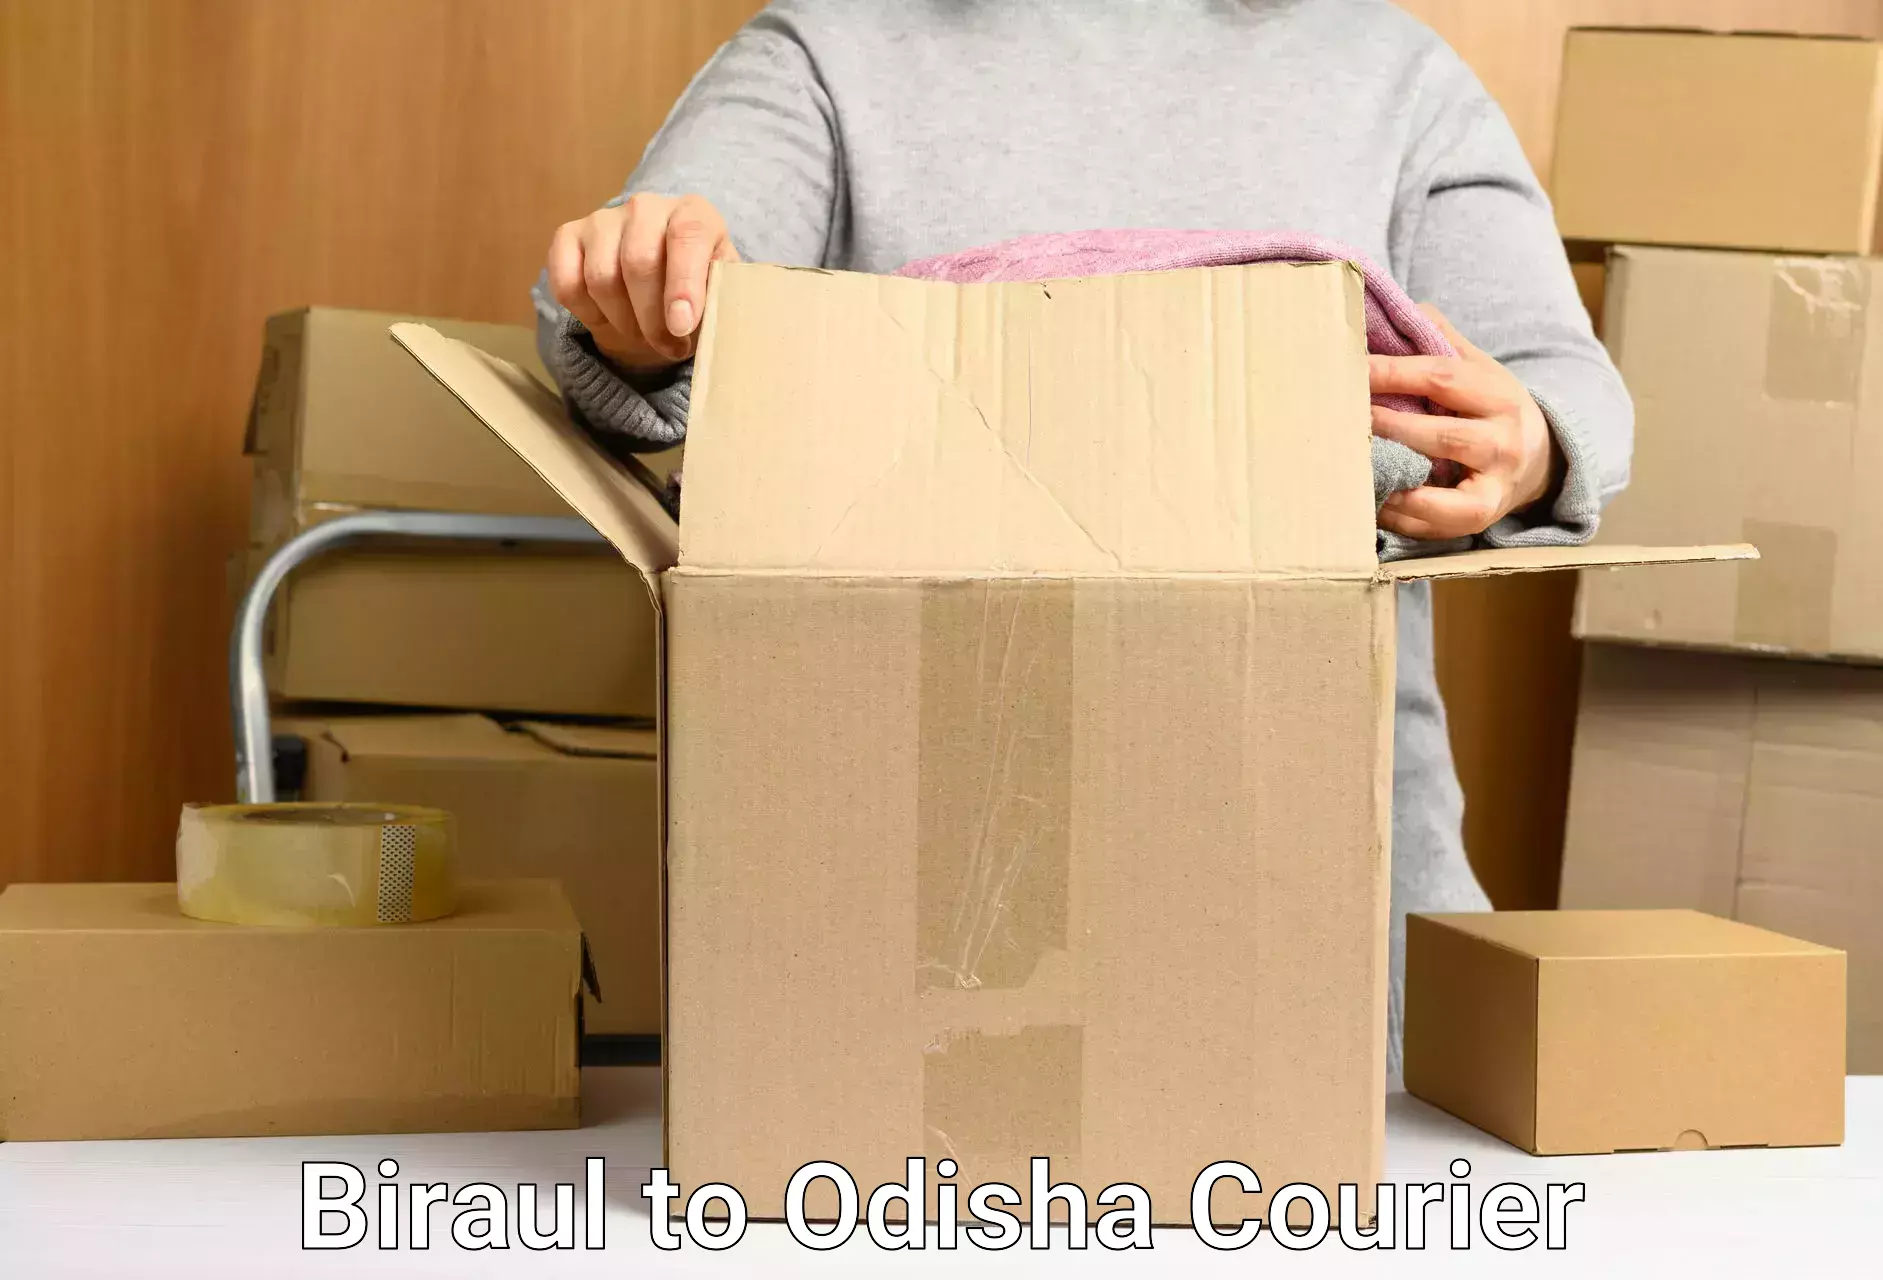 Courier service partnerships Biraul to Riamal